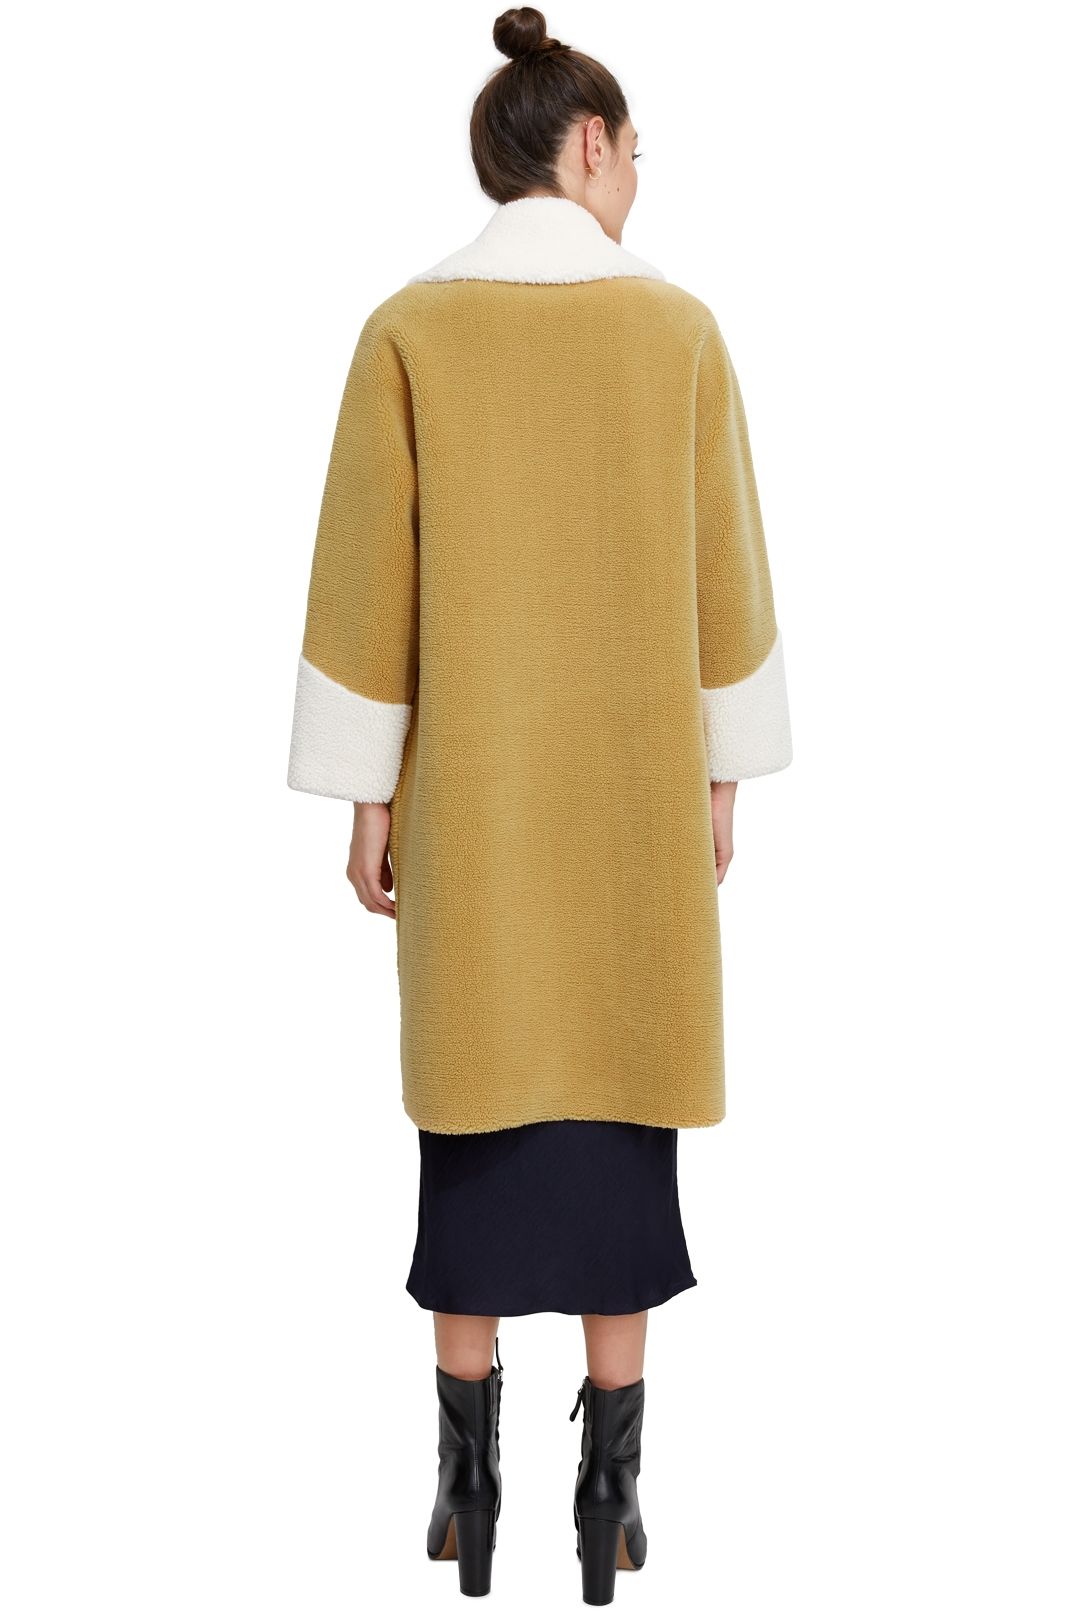 Unreal Fur Furever Chic Coat Mustard Relaxed Fit